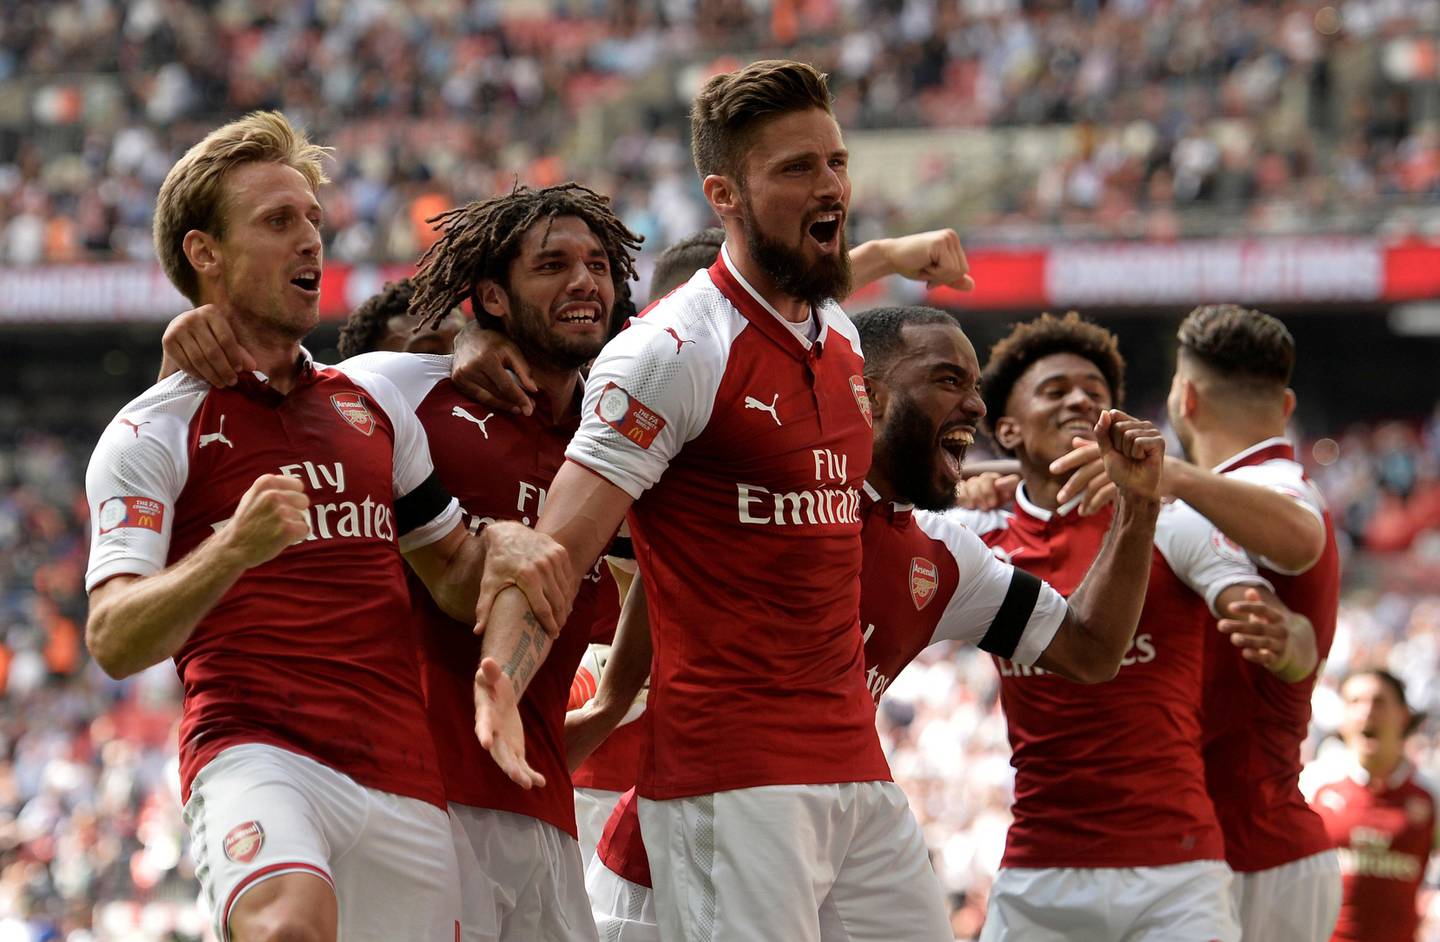 Soccer Football - Chelsea vs Arsenal - FA Community Shield - London, Britain - August 6, 2017   Arsenal's Olivier Giroud celebrates with teammates after scoring the winning penalty during the penalty shootout    REUTERS/Hannah McKay     TPX IMAGES OF THE DAY